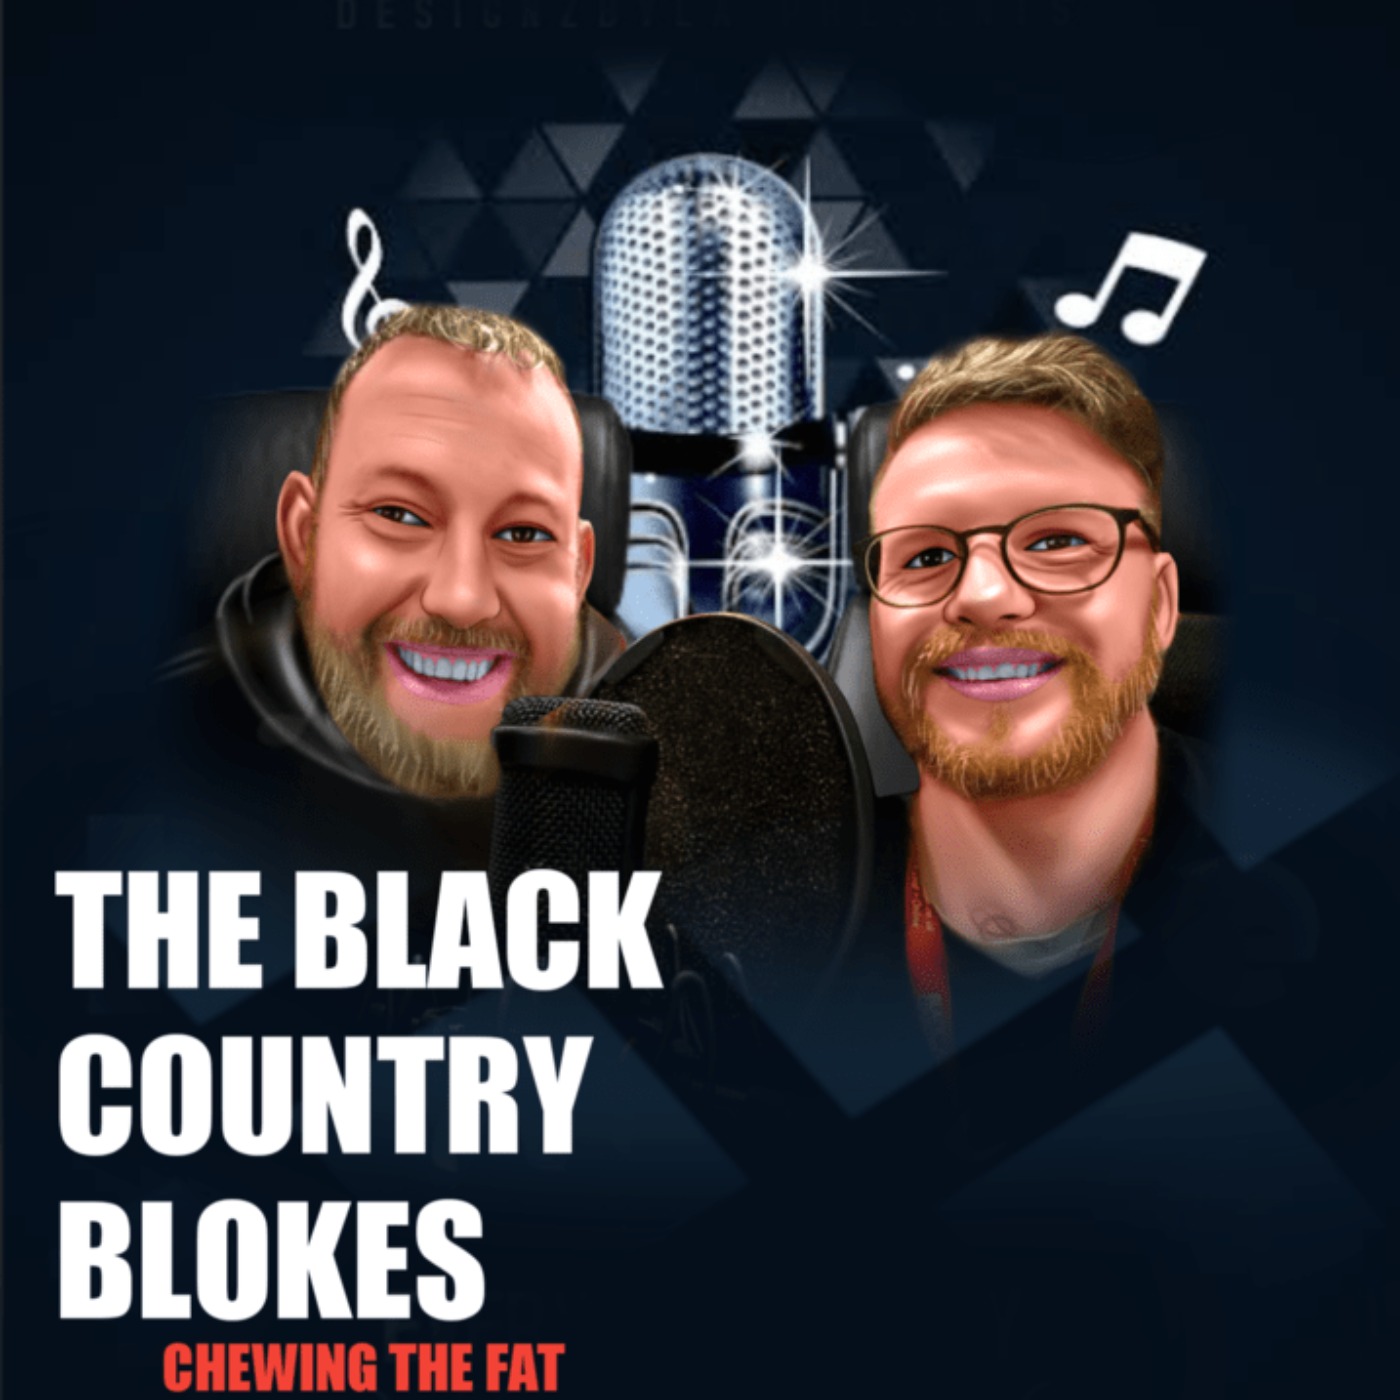 From Rockstars to Real Talk: Giant and the Georges on Mental Health with The Black Country Blokes